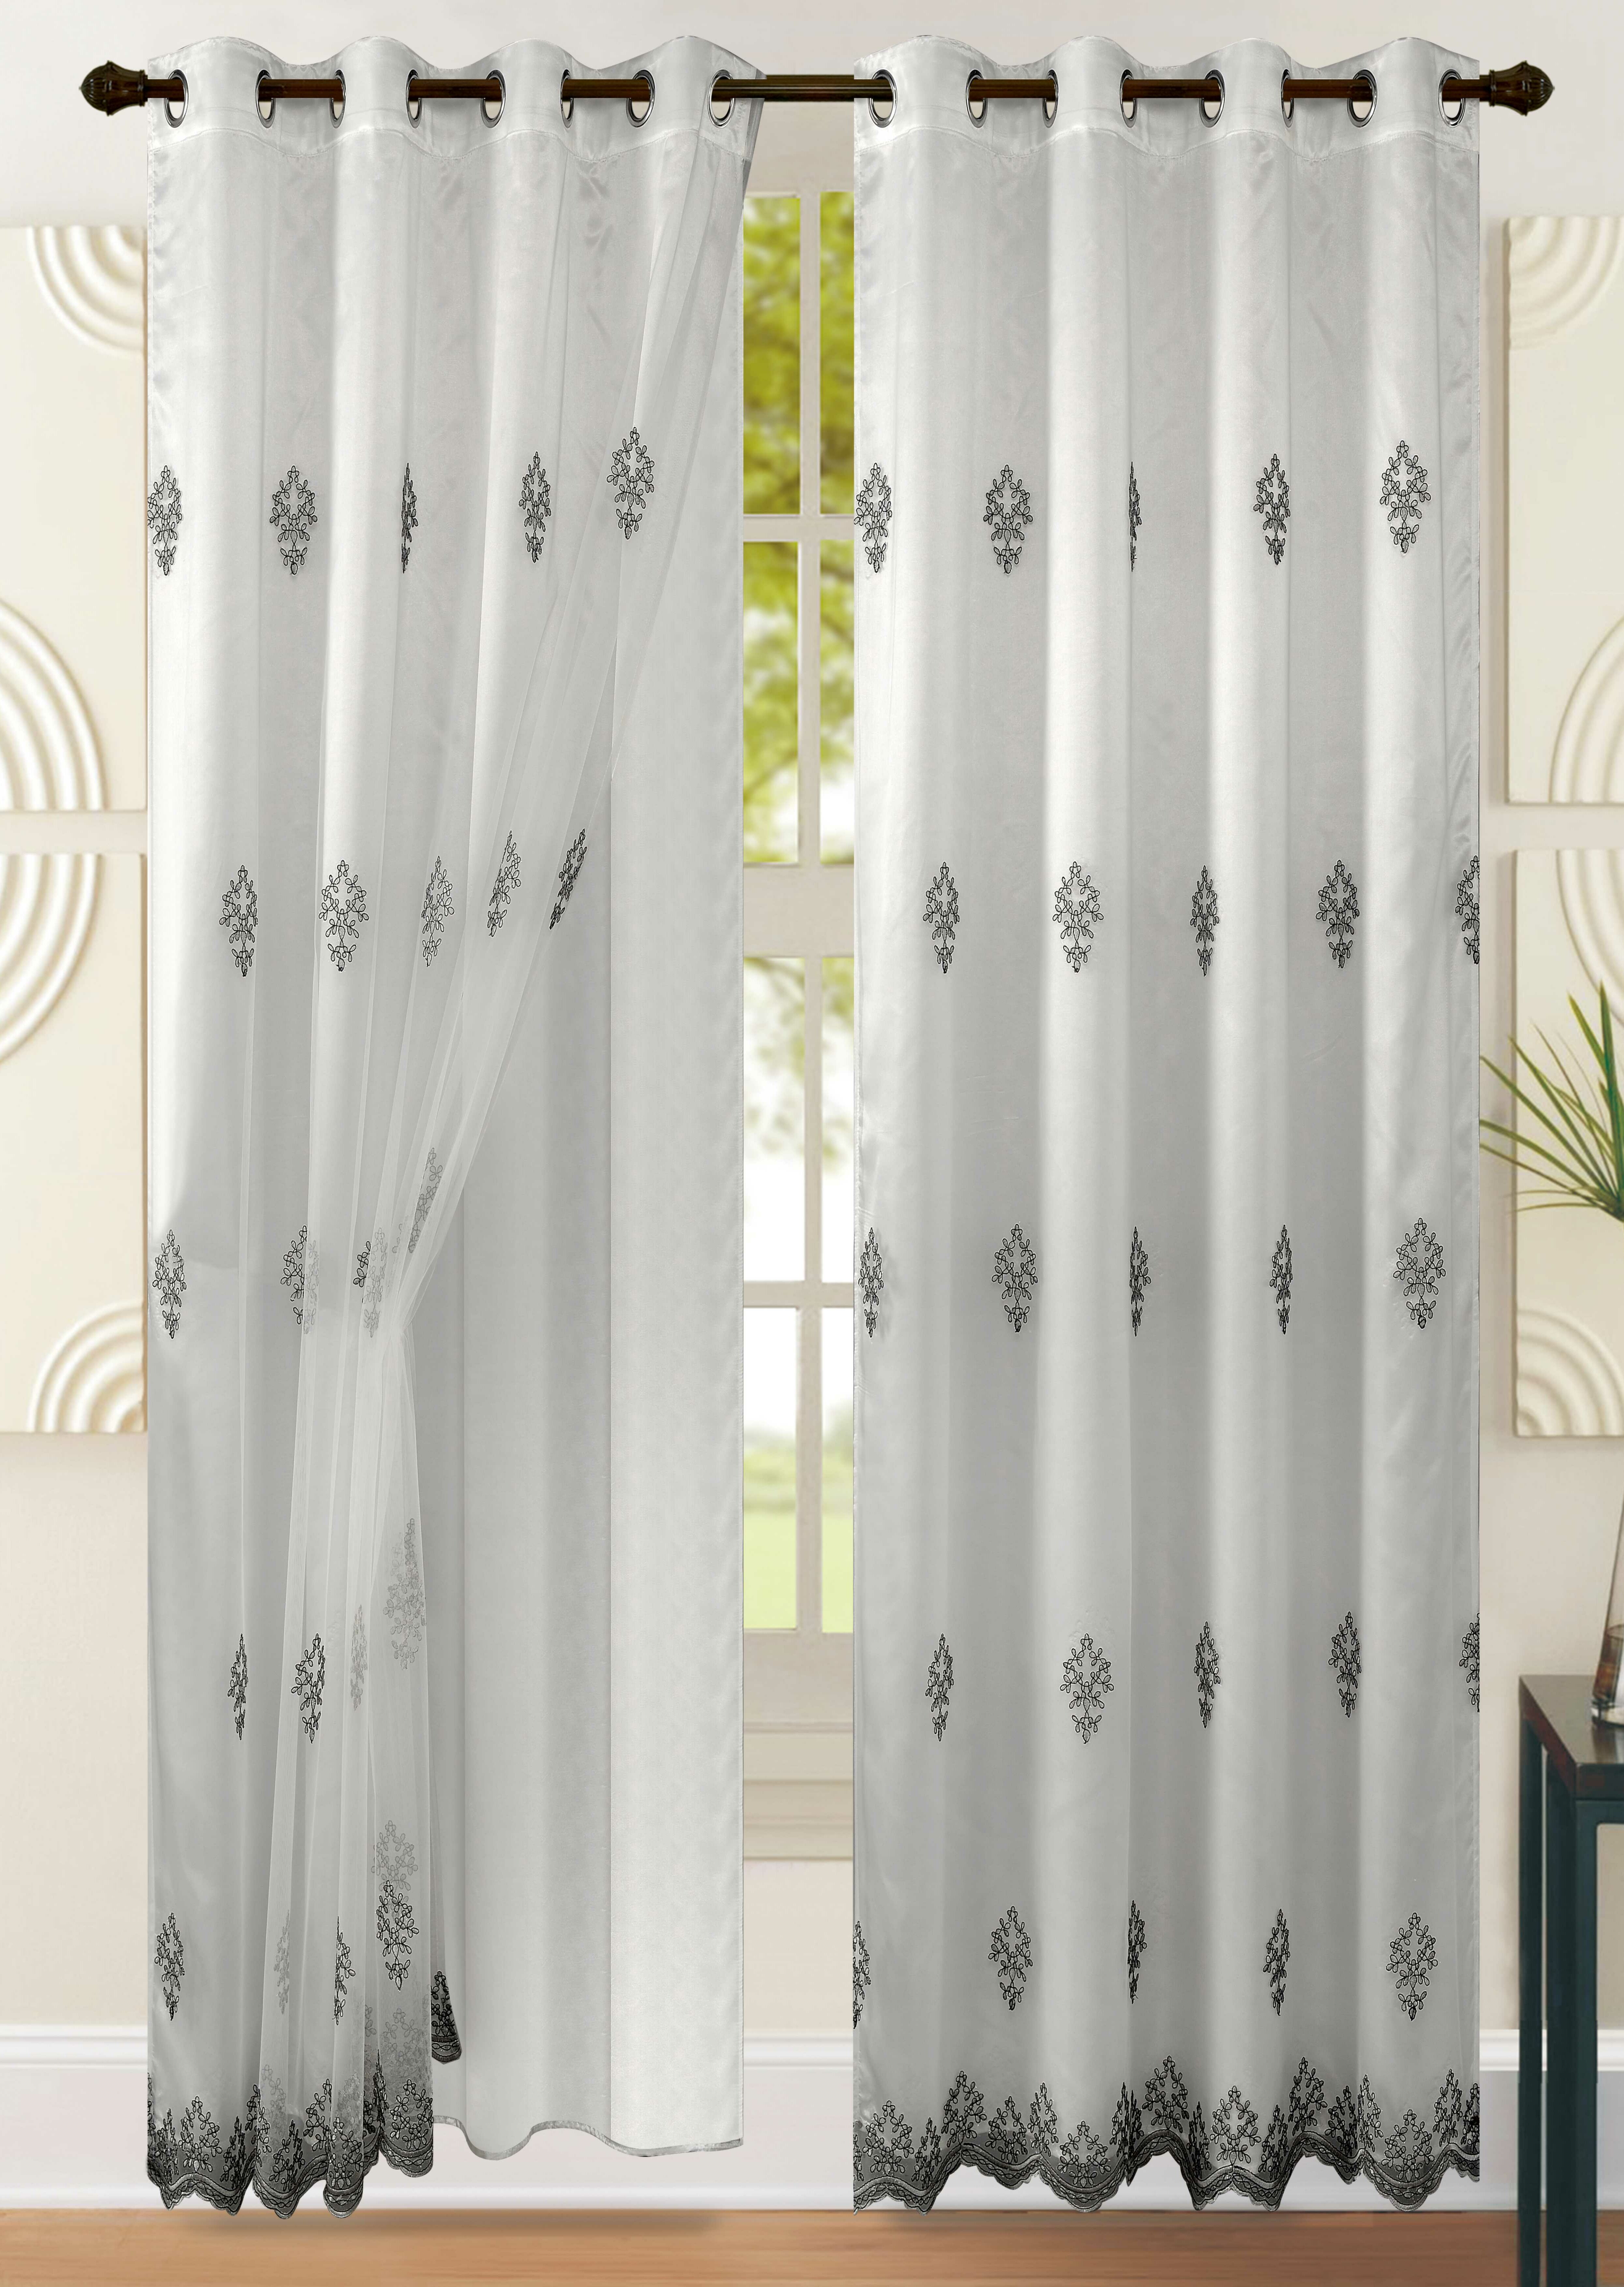 curtains and drapes ideas